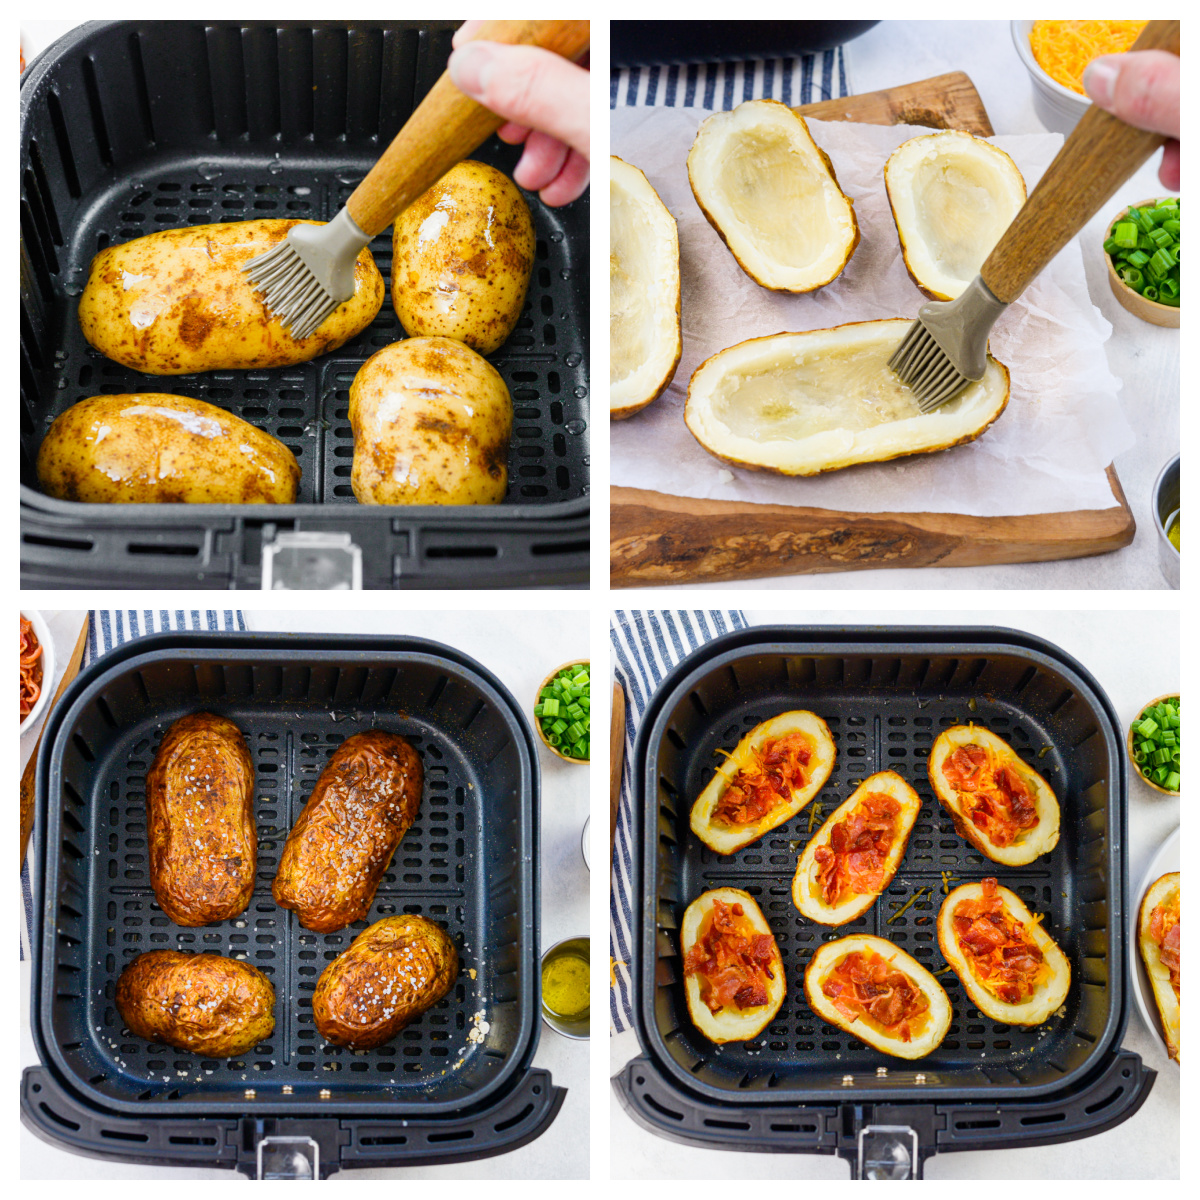 Collage of the steps of preparing potato skins in an air fryer.